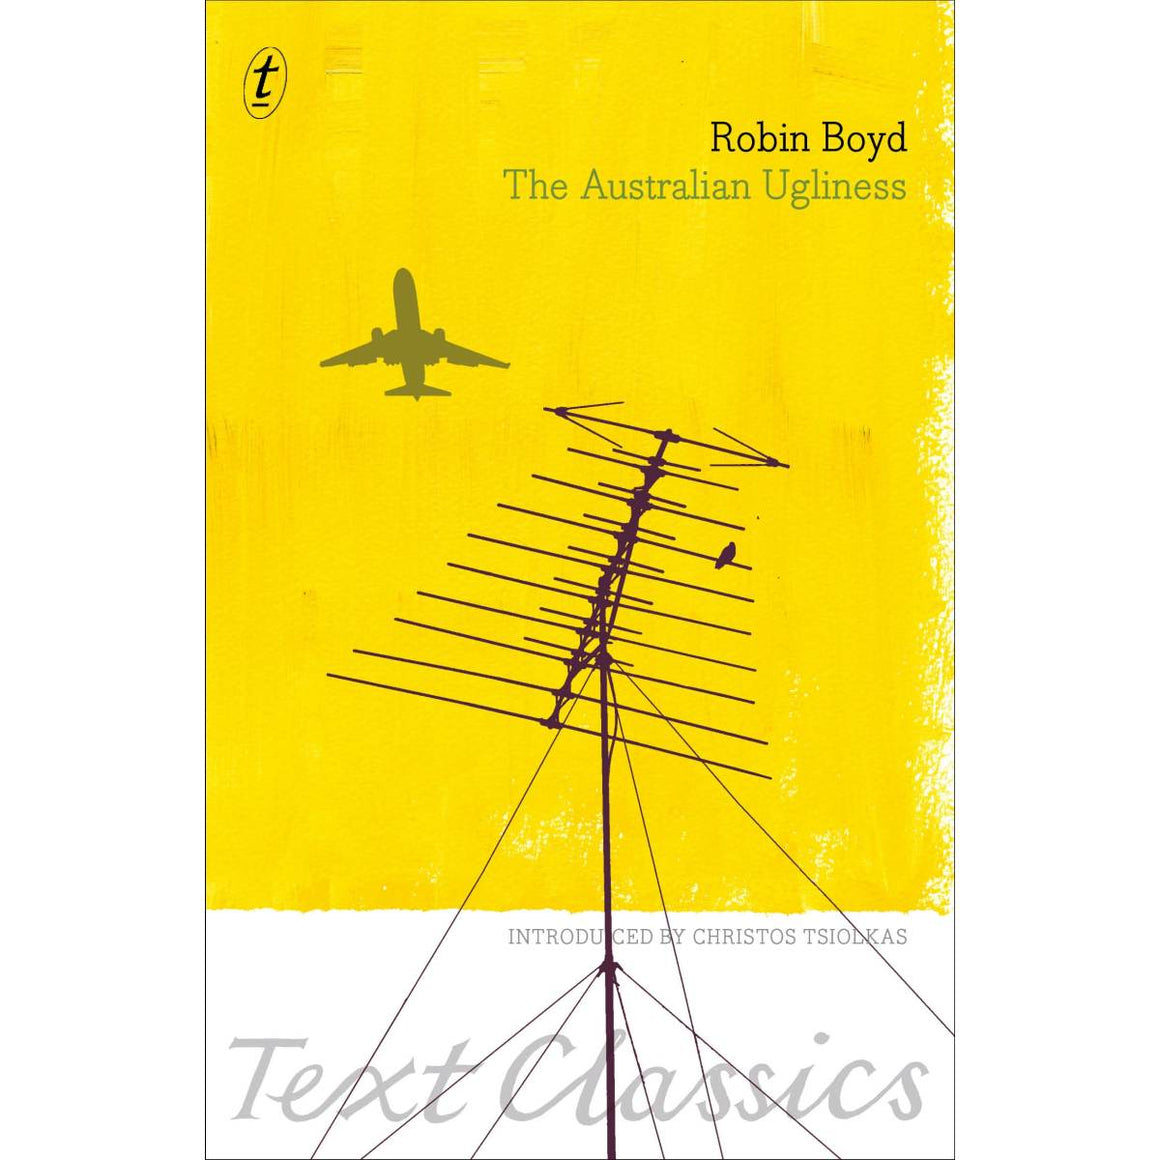 A yellow and white book cover with the image of an old style TV aerial and the silhouette of a plane taking off.